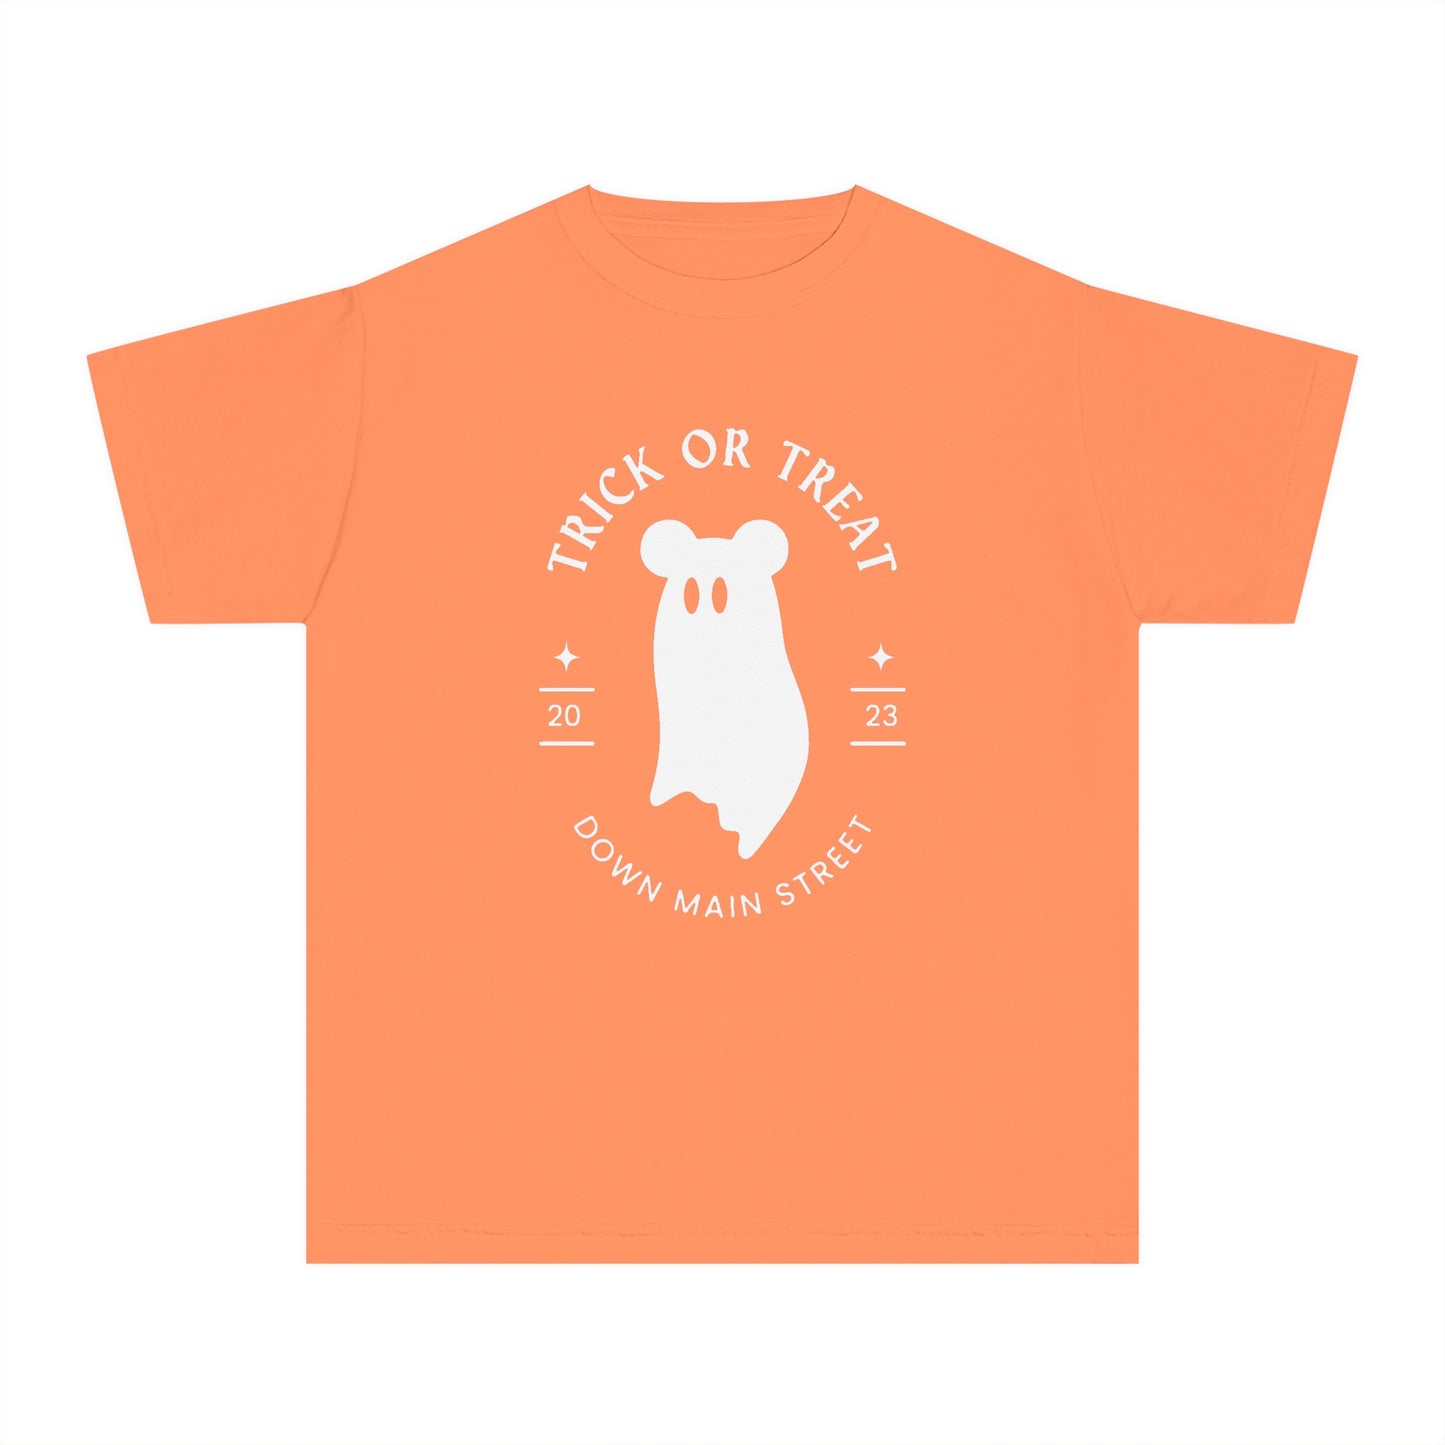 Trick or Treat Down Main Street Comfort Colors Youth Midweight Tee